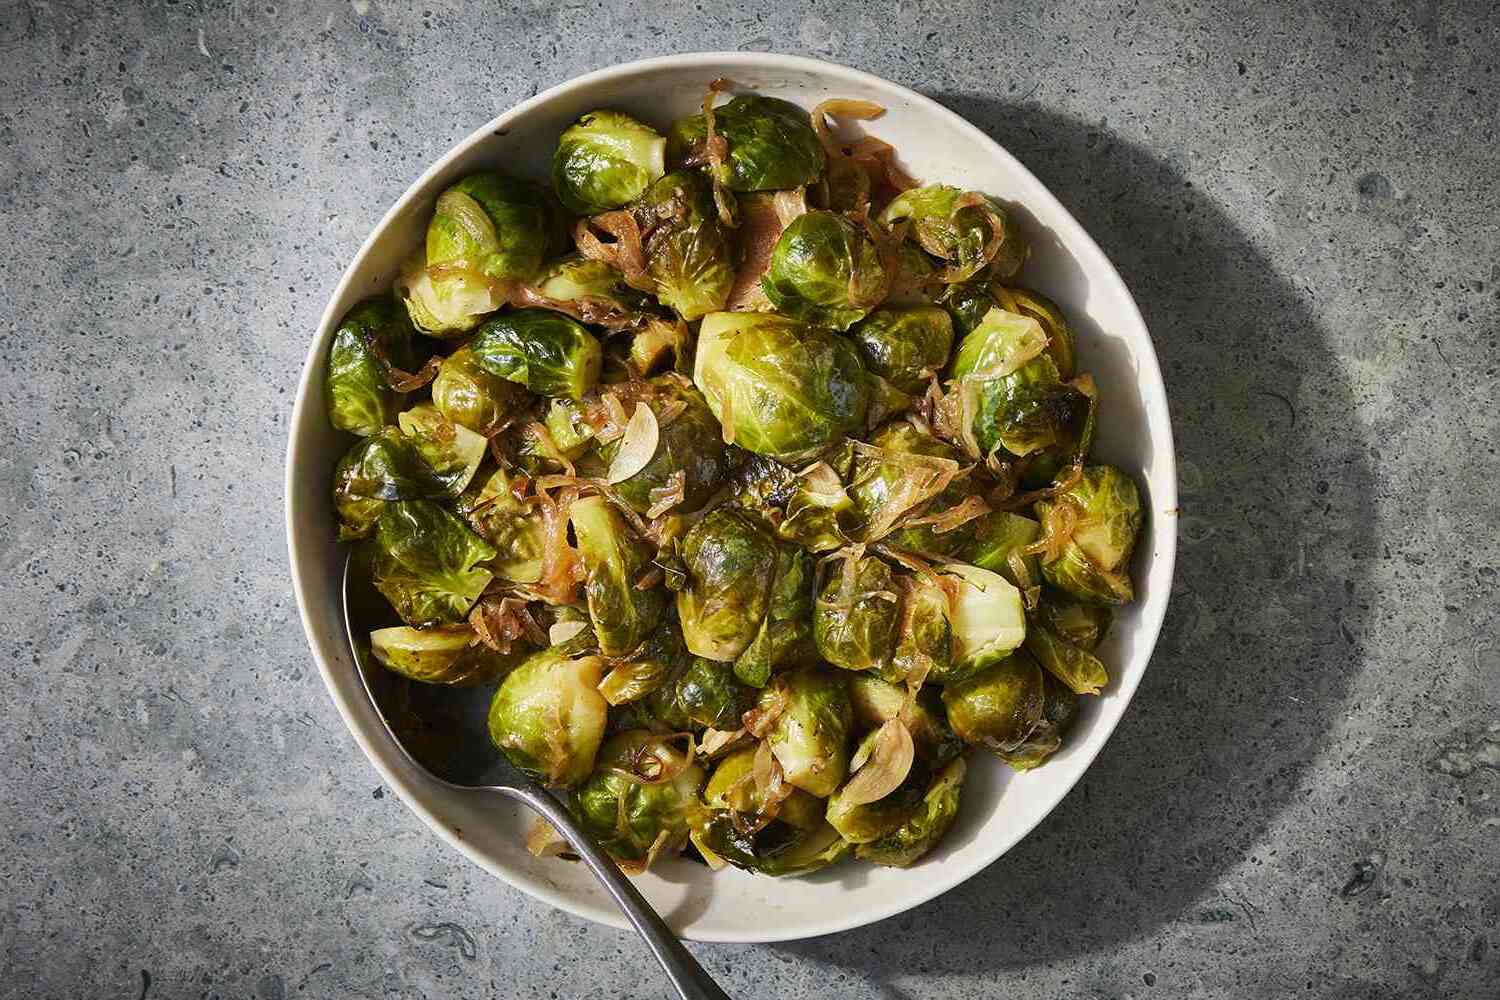 How to Make Brussel Sprouts in the Pressure Cooker